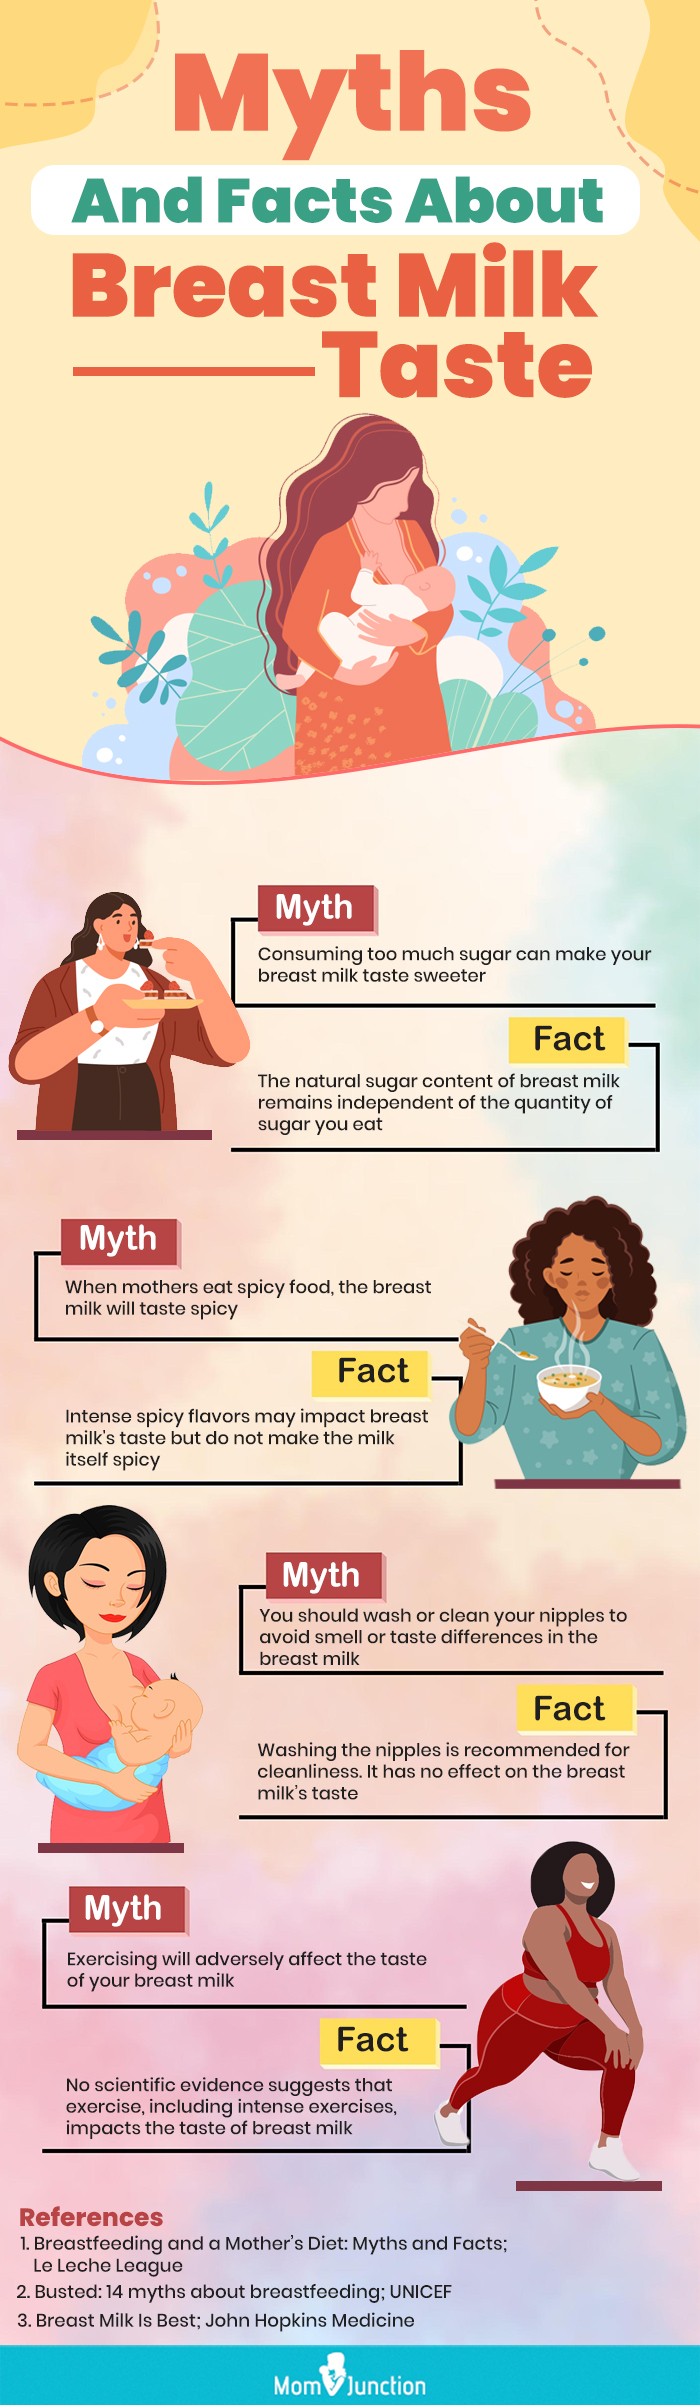 myths and facts about breast milk taste [infographic]